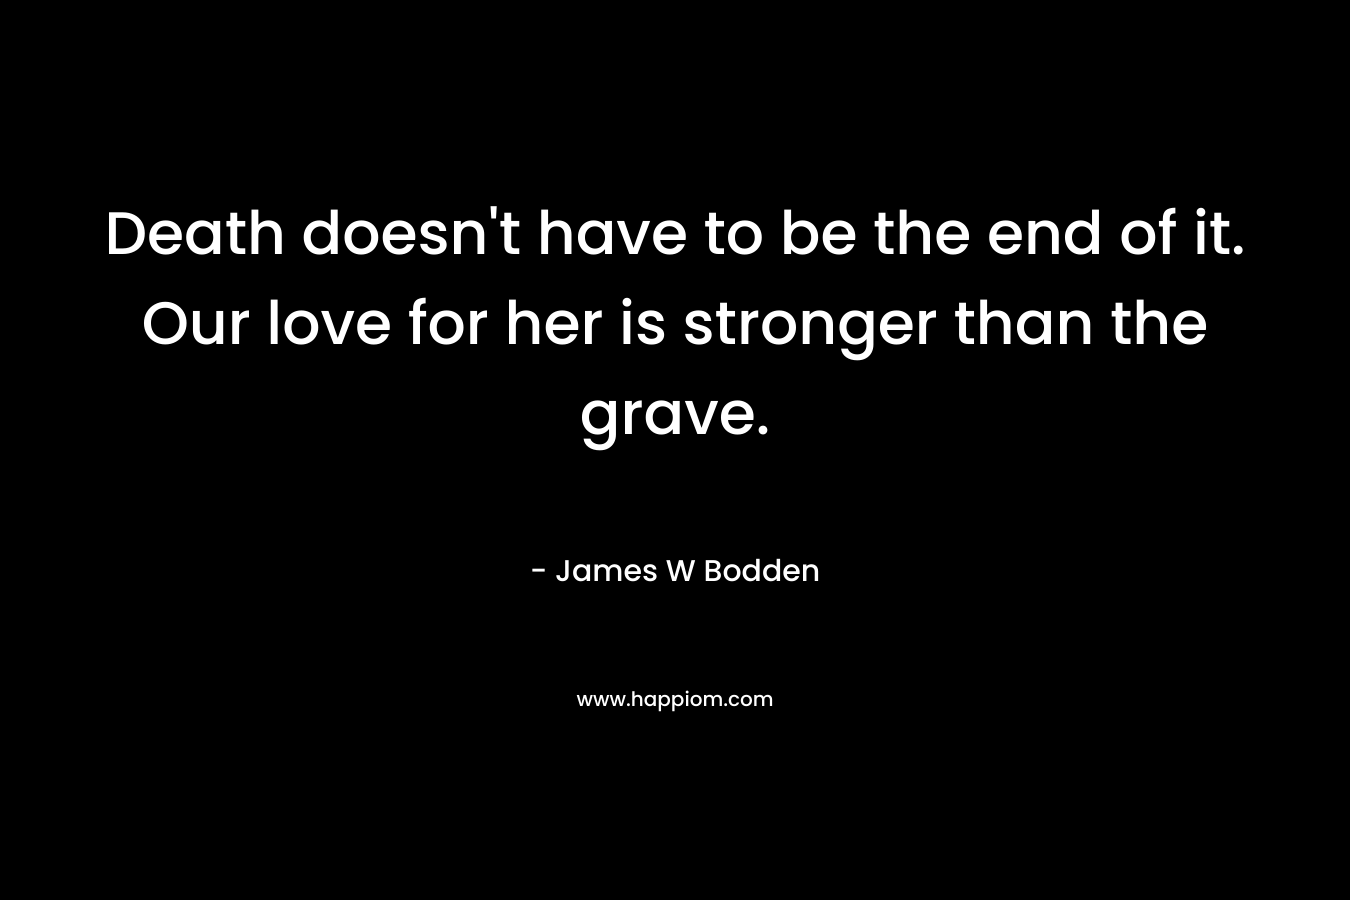 Death doesn't have to be the end of it. Our love for her is stronger than the grave.